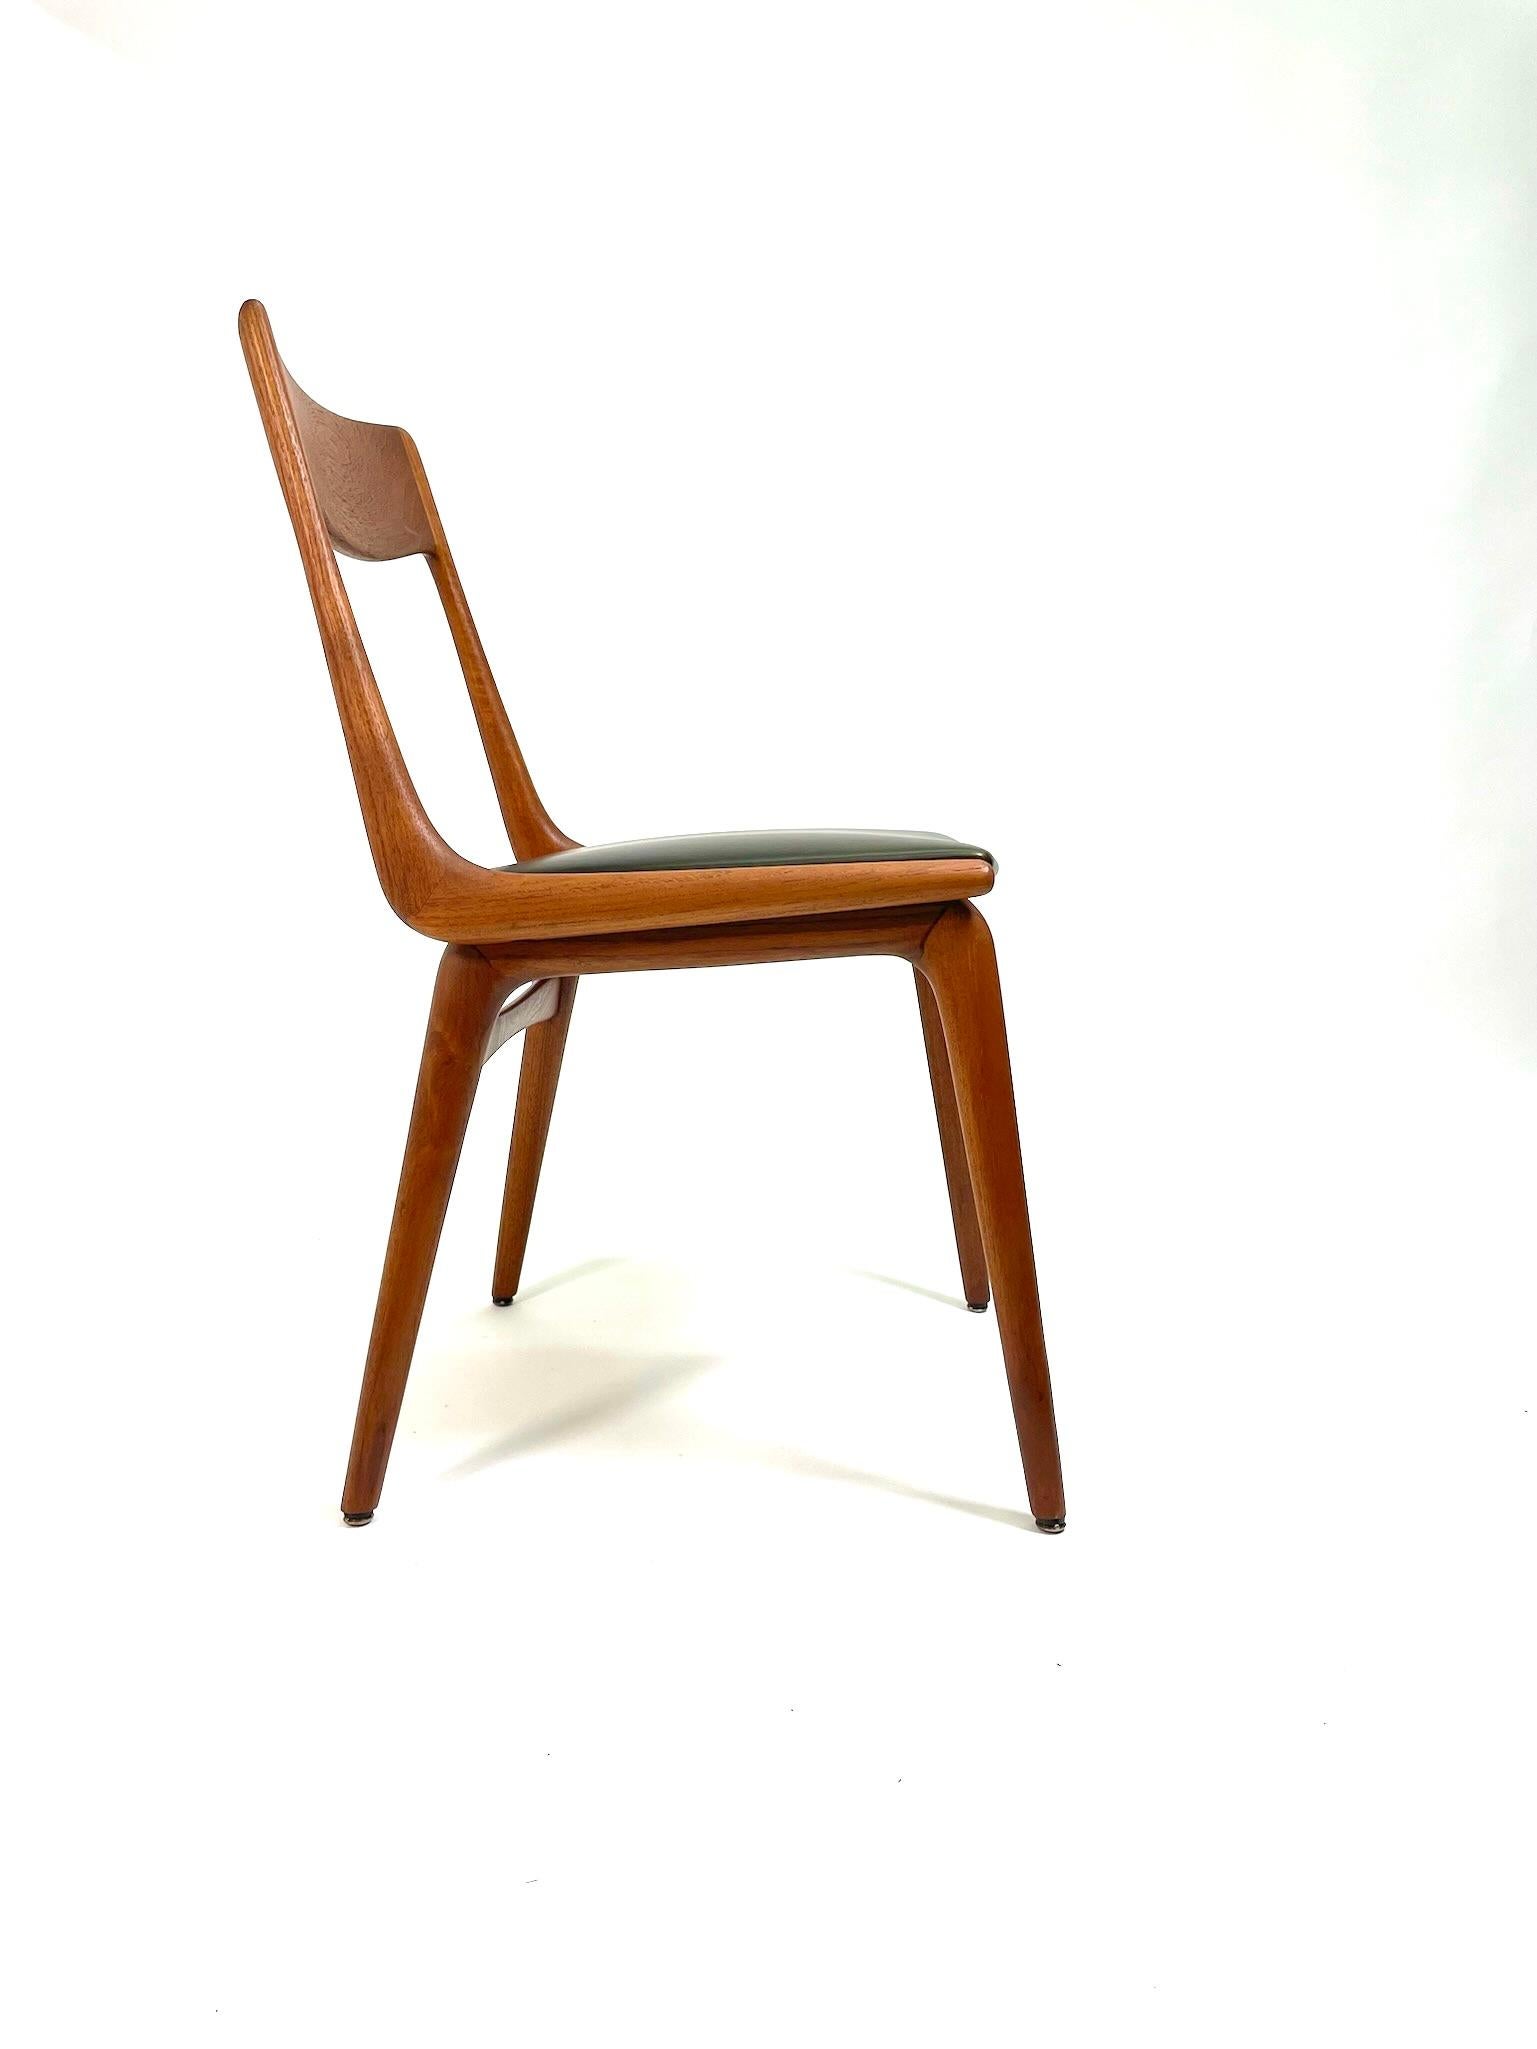 Mid-20th Century Set of 4 Boomerang Dining Chairs by Alfred Christensen for Slagelse Møbelværk in